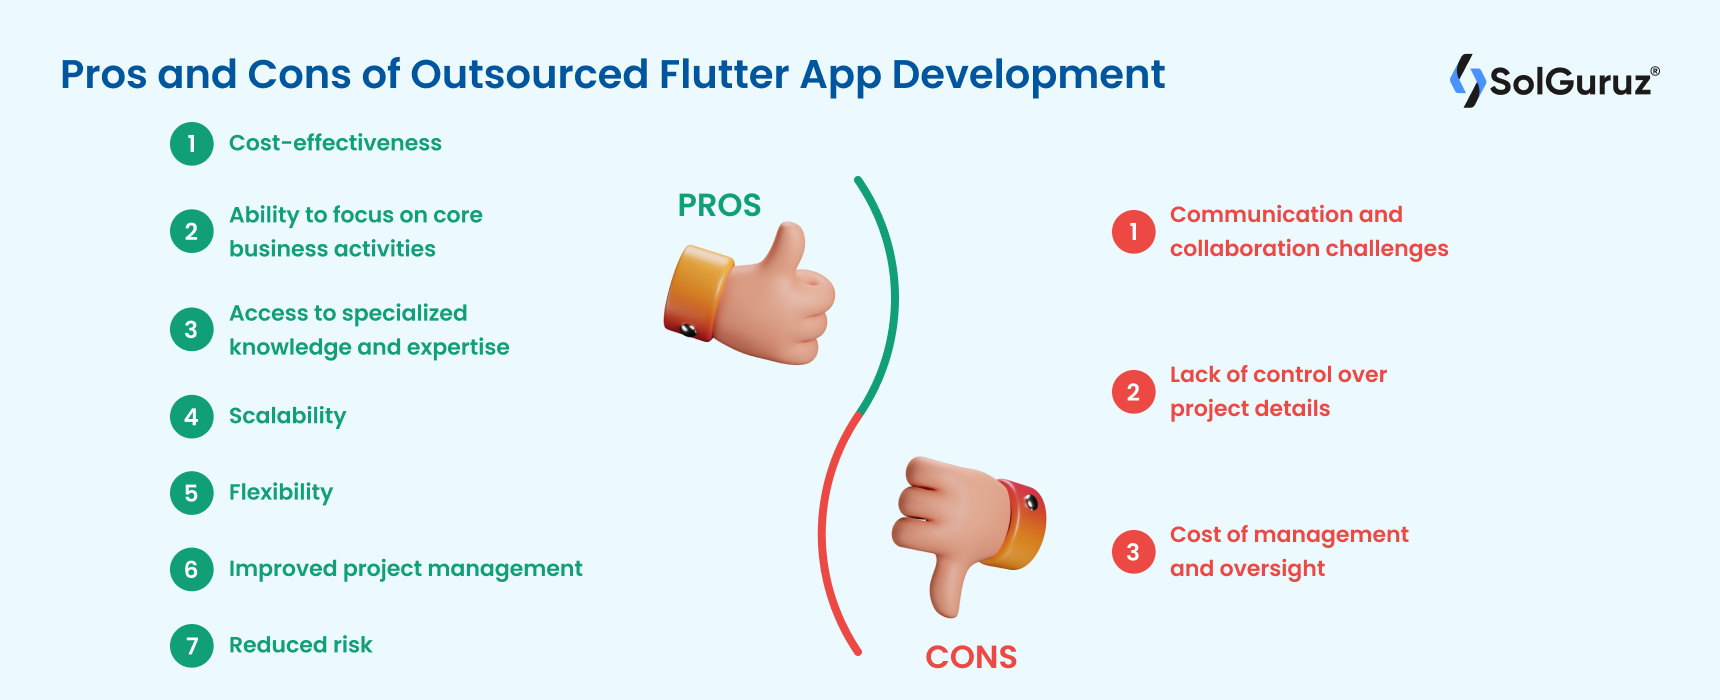 Pros and Cons of Outsourced Flutter App Development